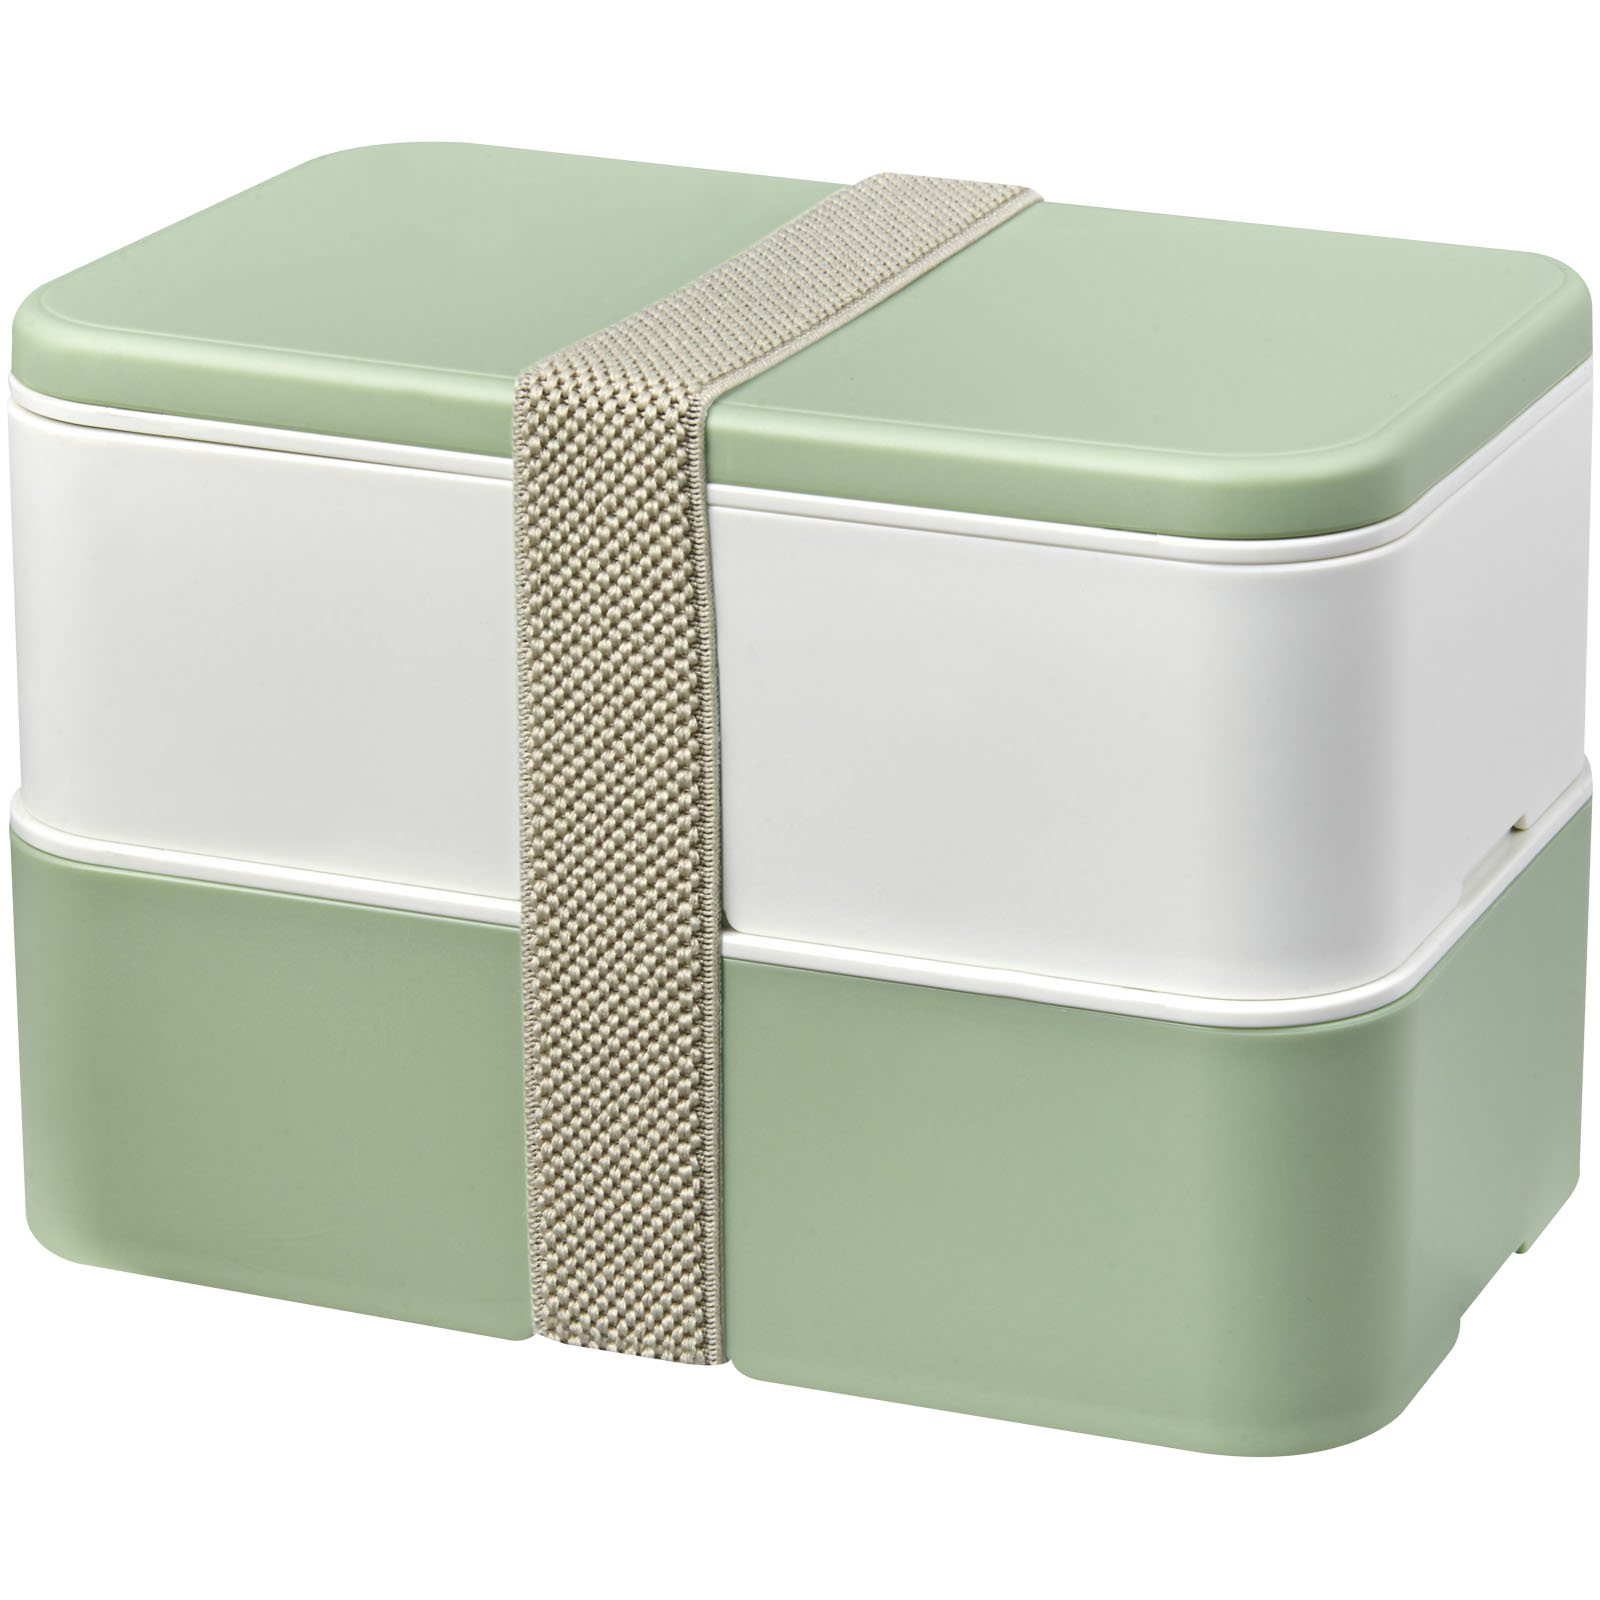 Lunch Boxes - MIYO Renew double layer lunch box